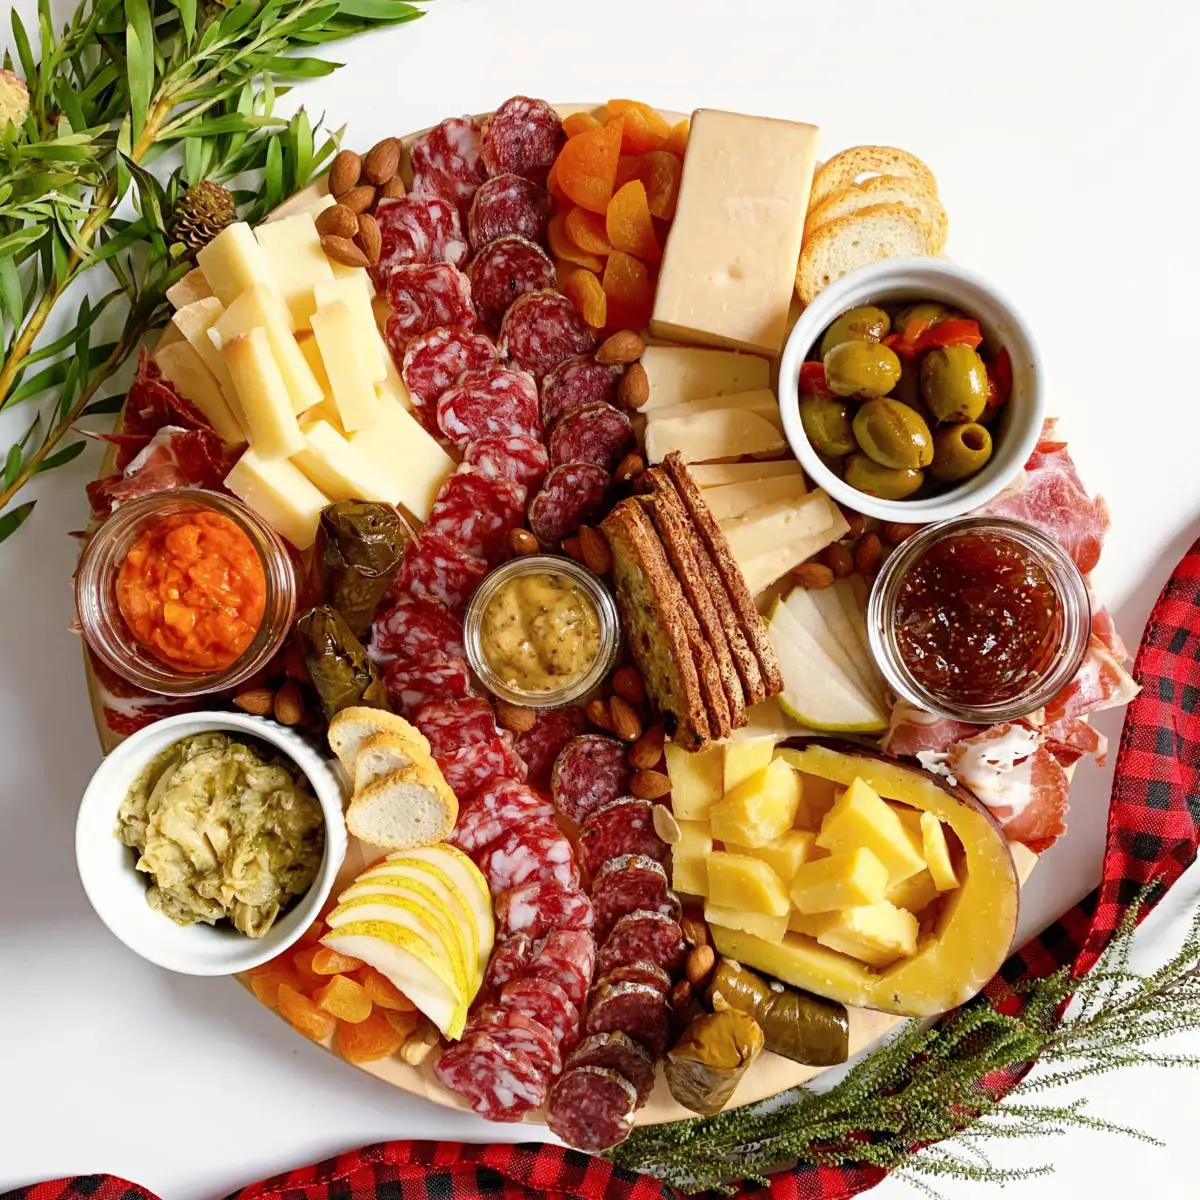 Adding dips to a charcuterie board